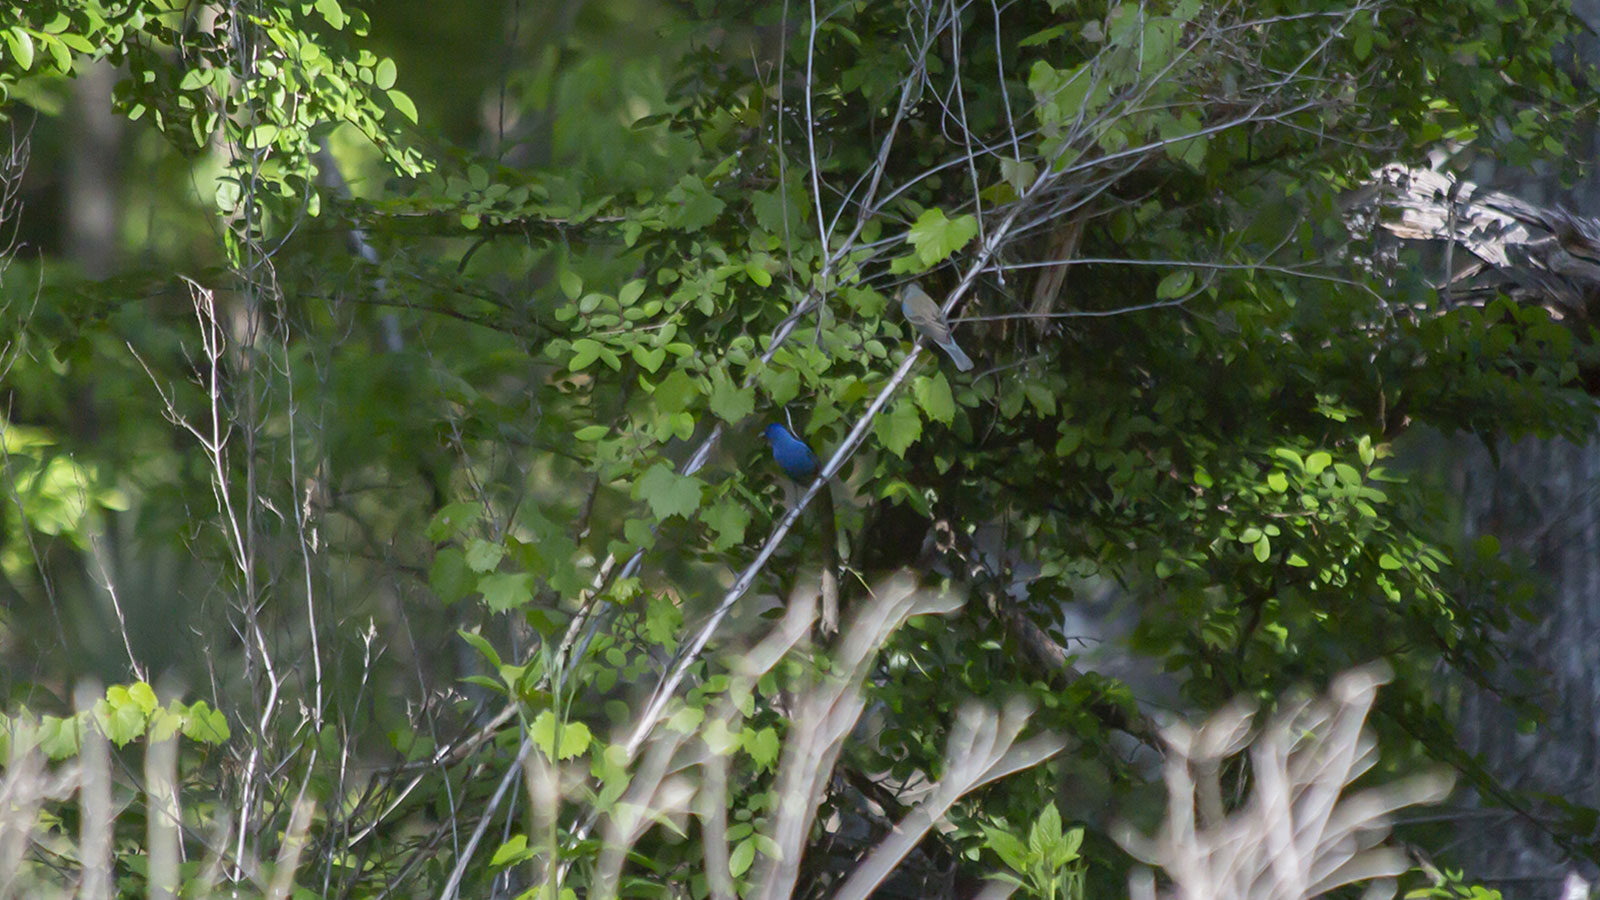 Indigo bunting looking out from a tree